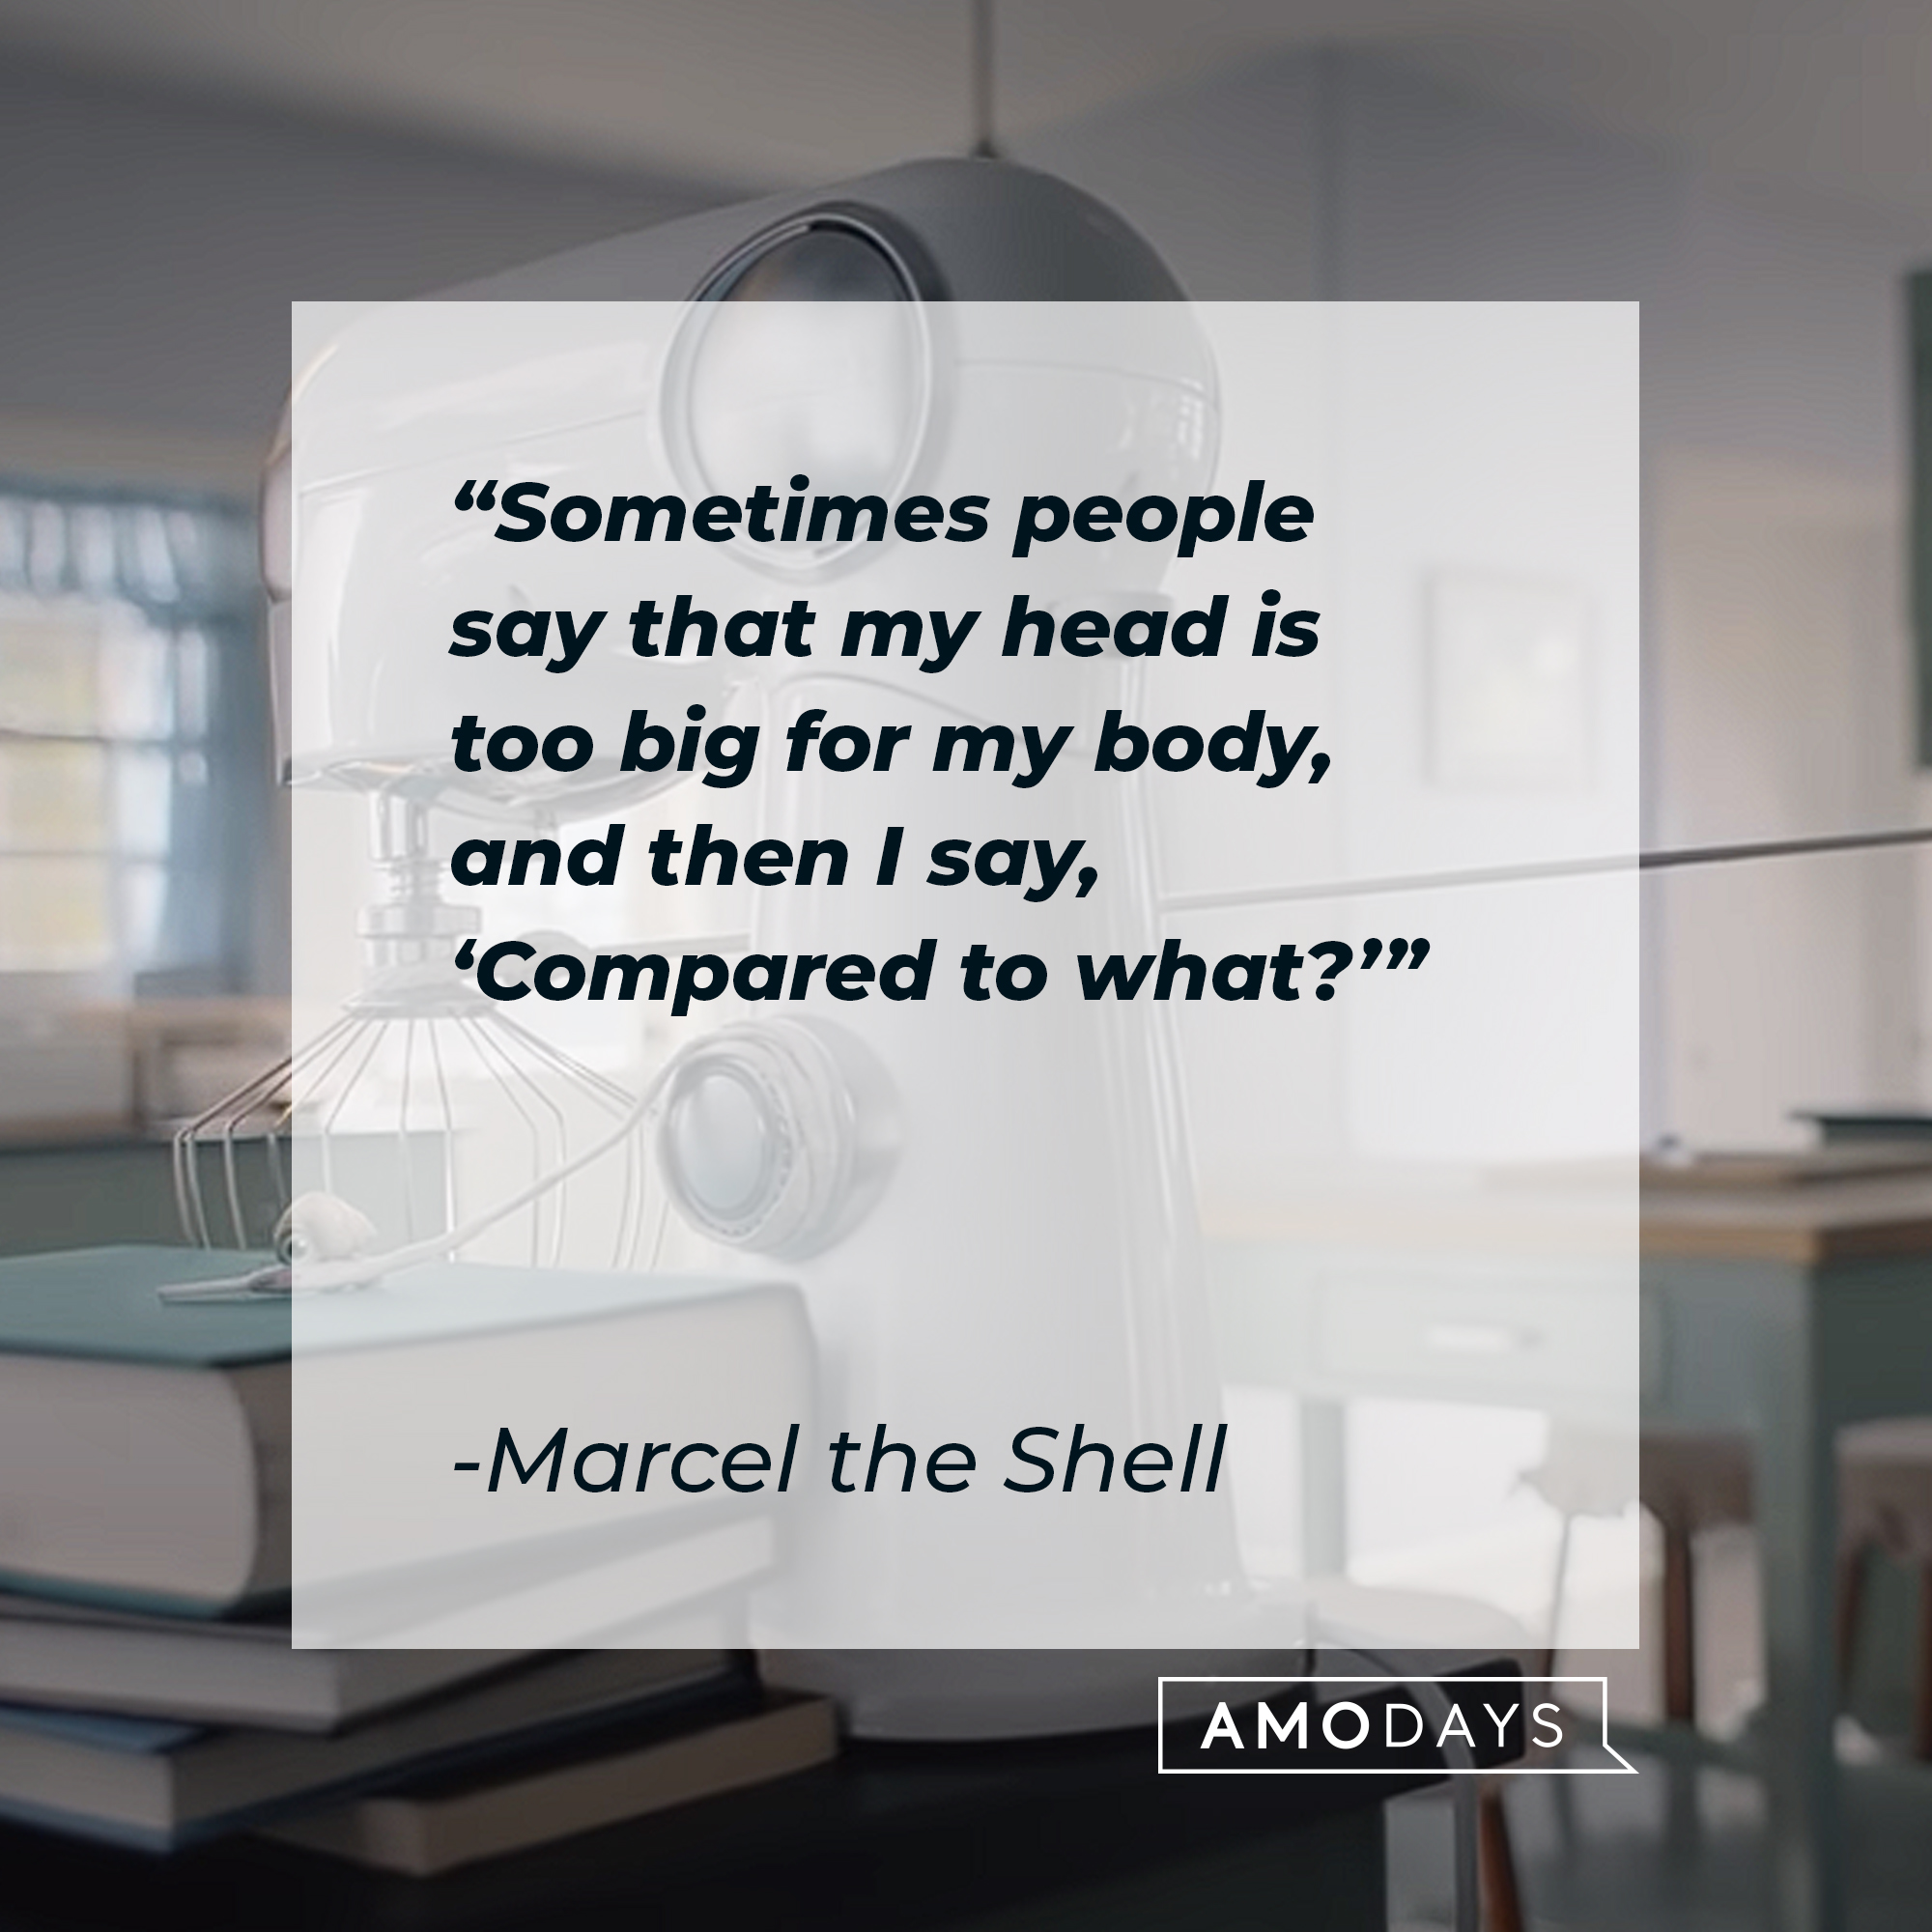 Marcel the Shell's quote: "Sometimes people say that my head is too big for my body, and then I say, 'Compared to what?'" | Source: youtube.com/A24